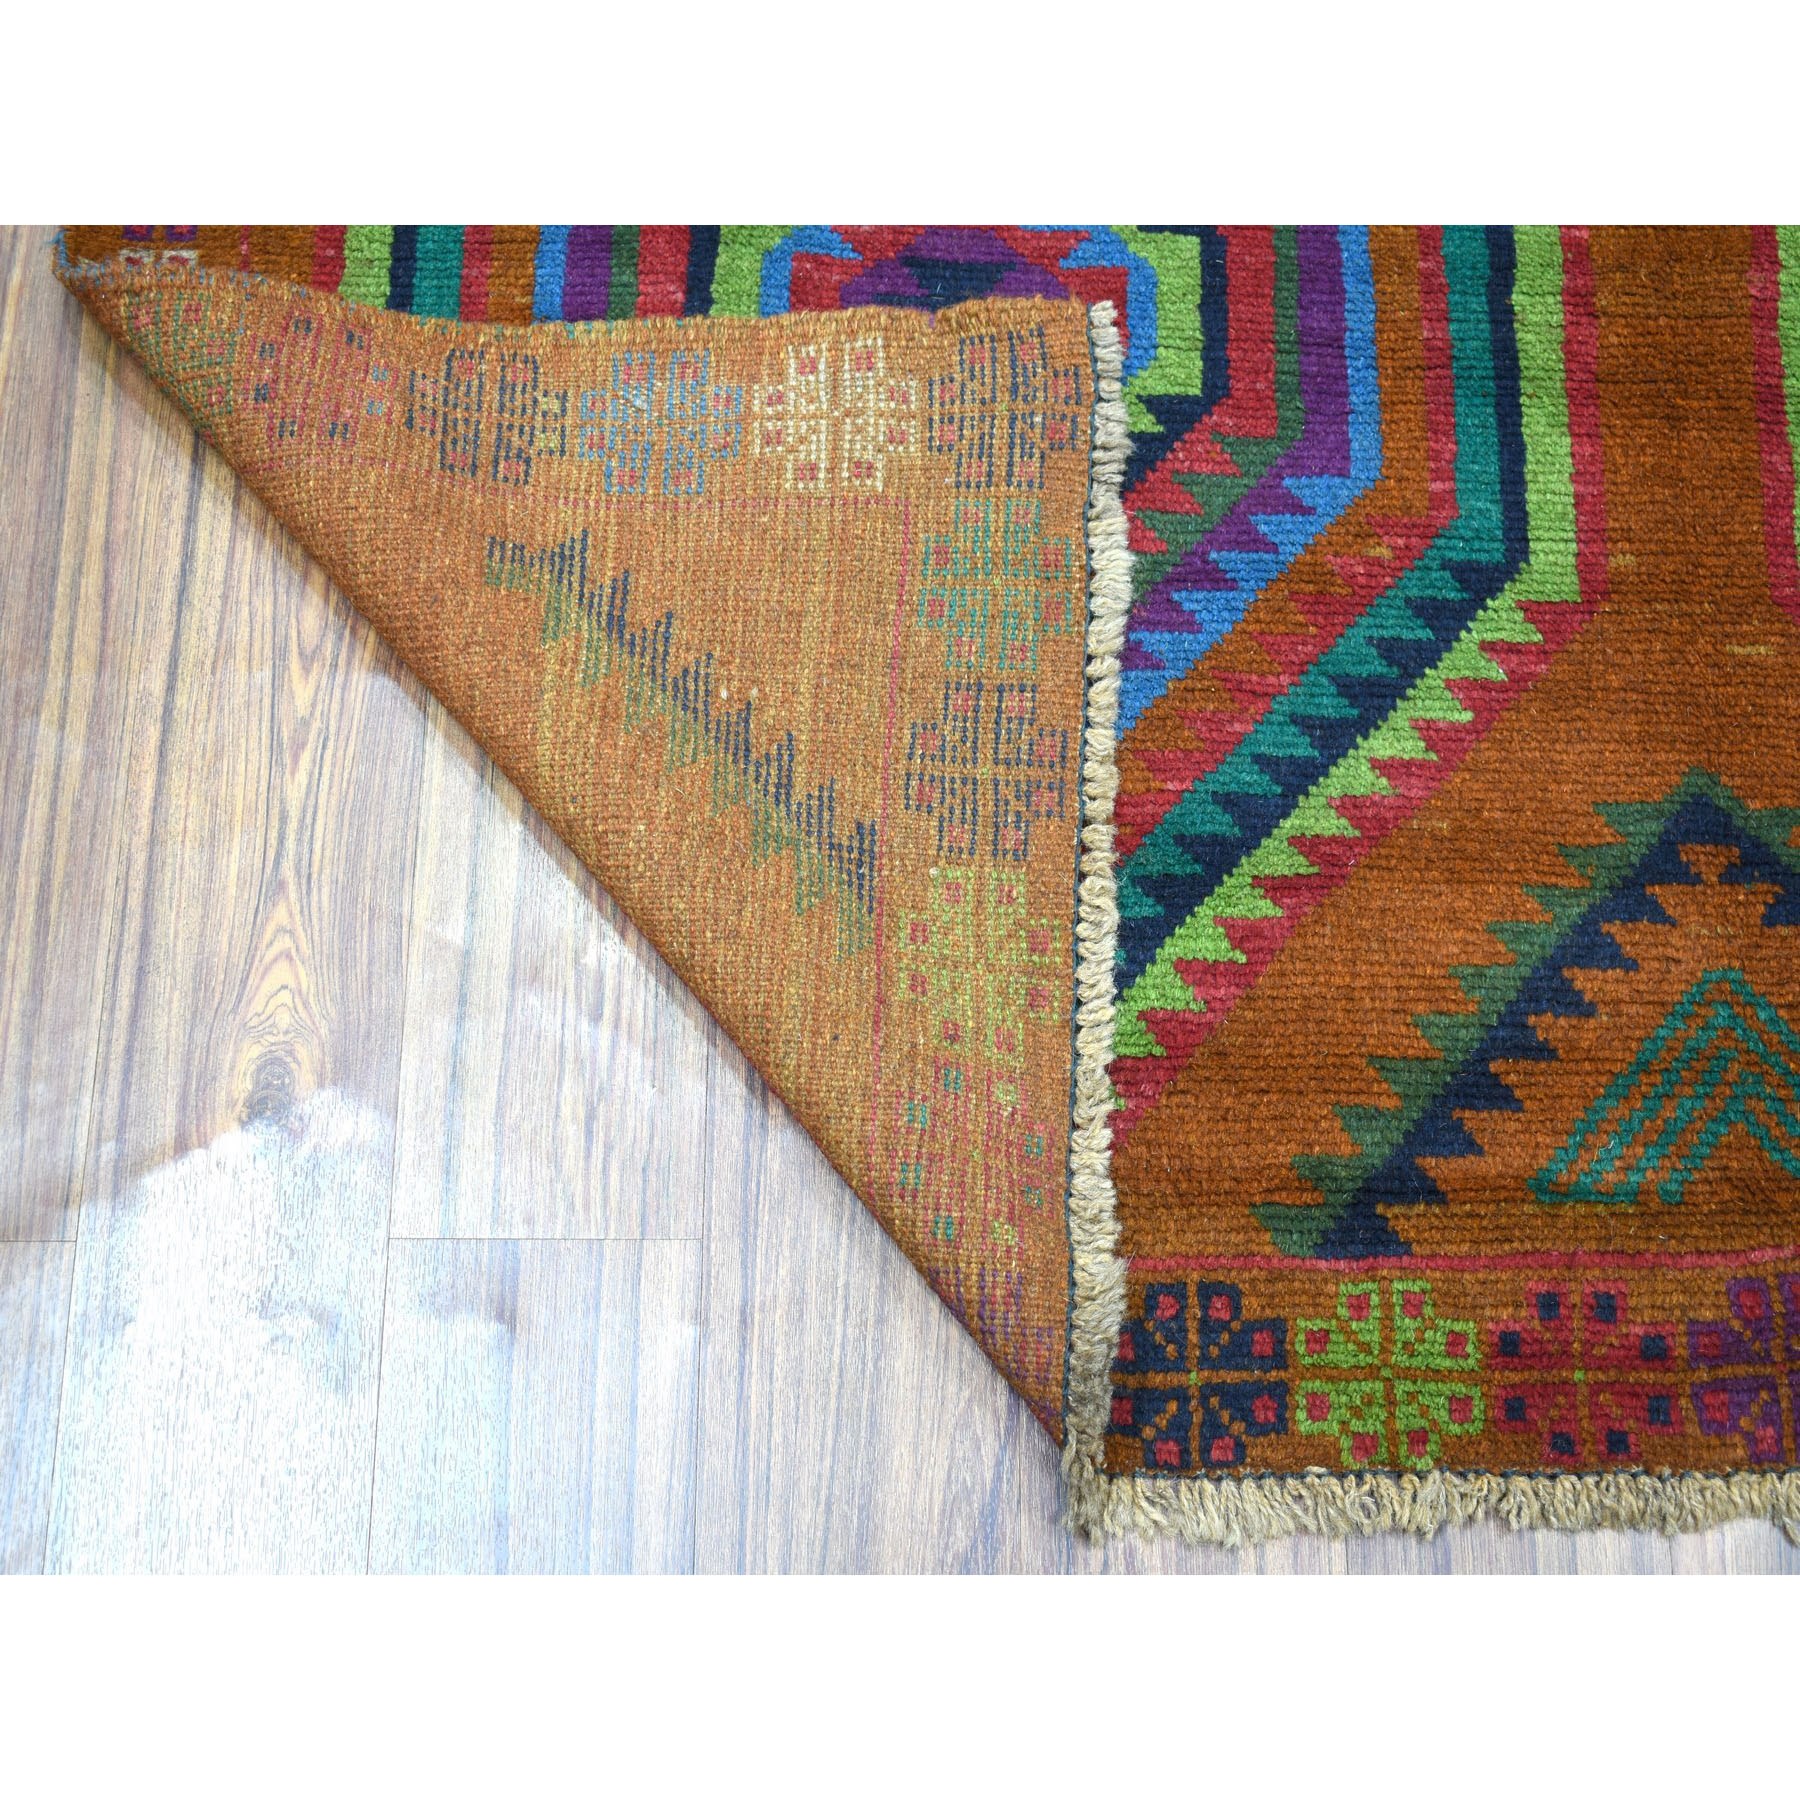 6'x8' Brown Colorful Afghan Baluch Hand Woven Geometric Design Pure Wool Oriental Rug 